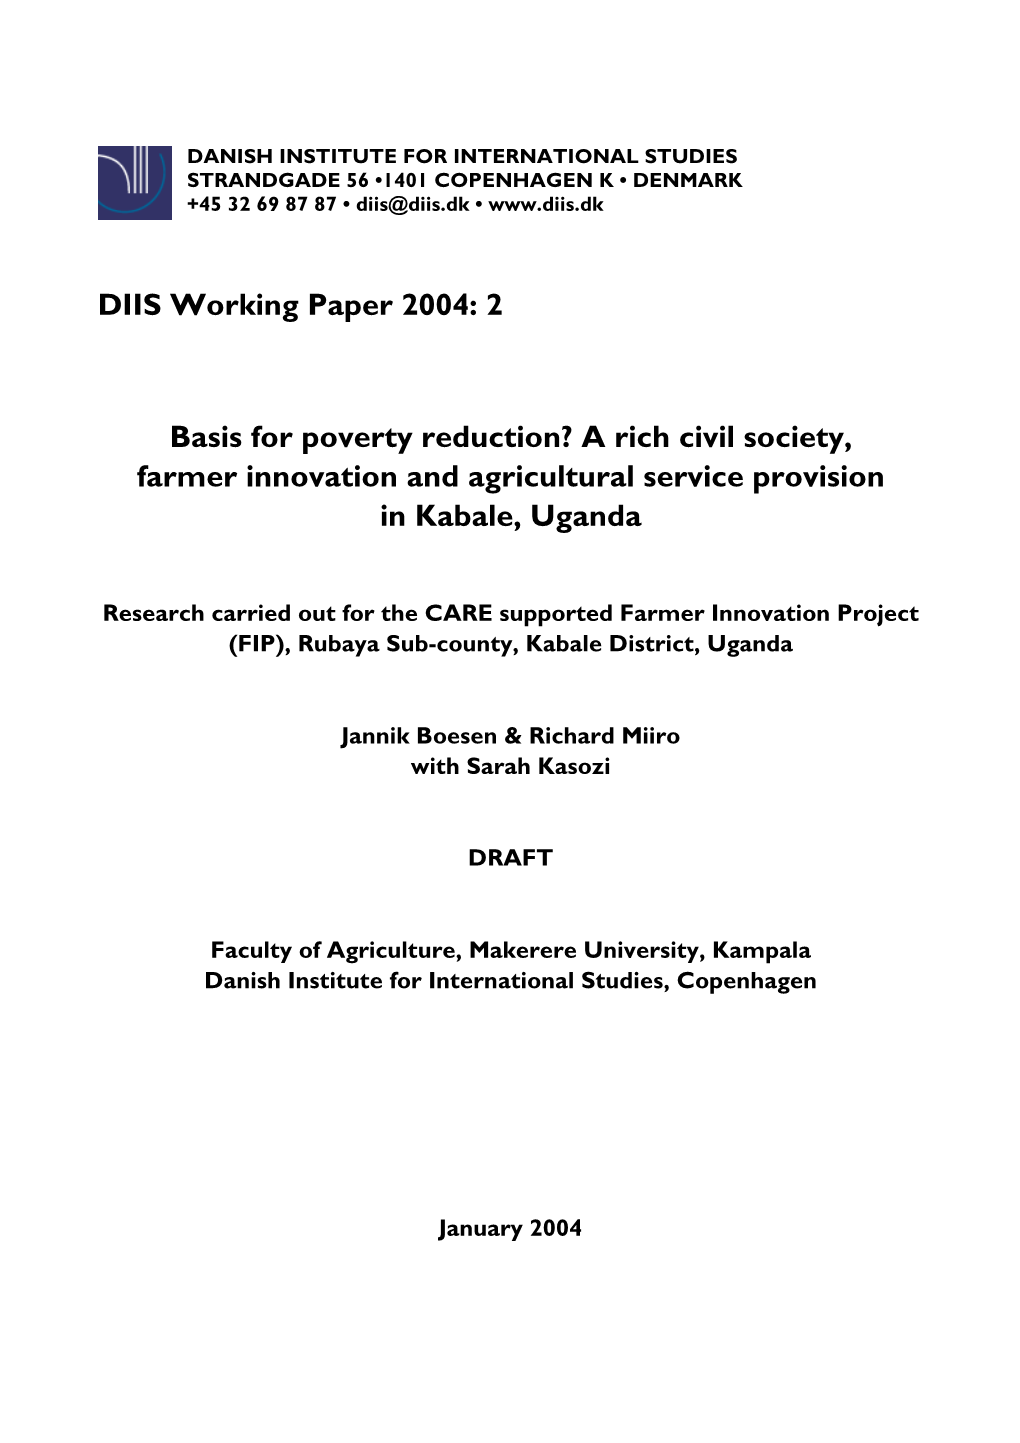 Basis for Poverty Reduction? a Rich Civil Society, Farmer Innovation and Agricultural Service Provision in Kabale, Uganda